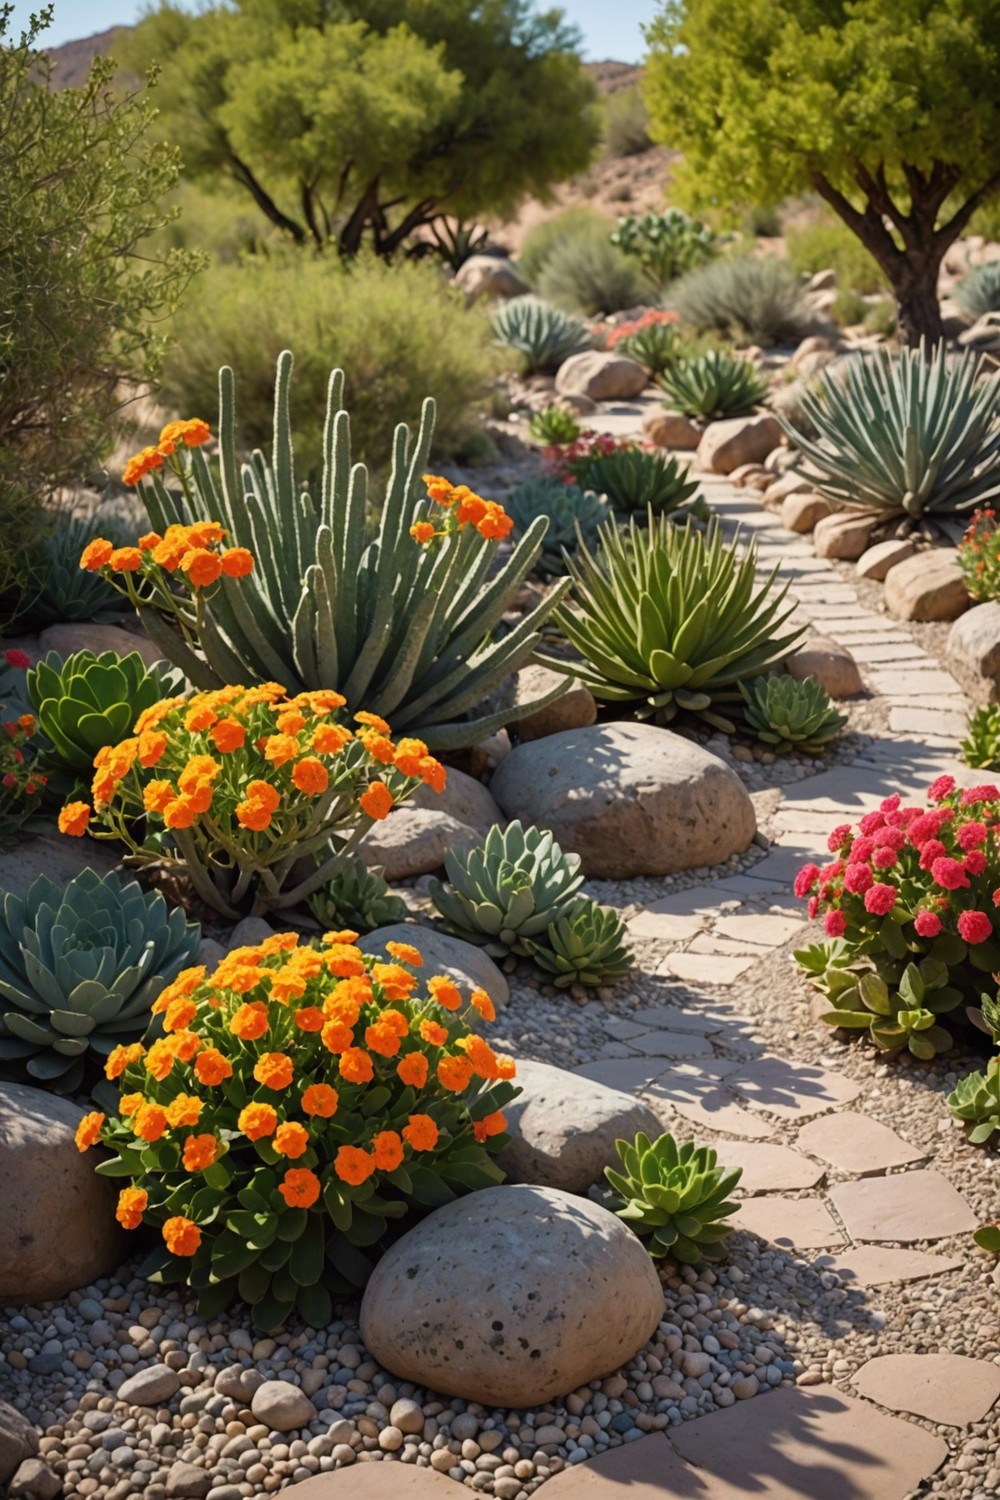 Focus on Texture with a Mix of Plants and Hardscapes